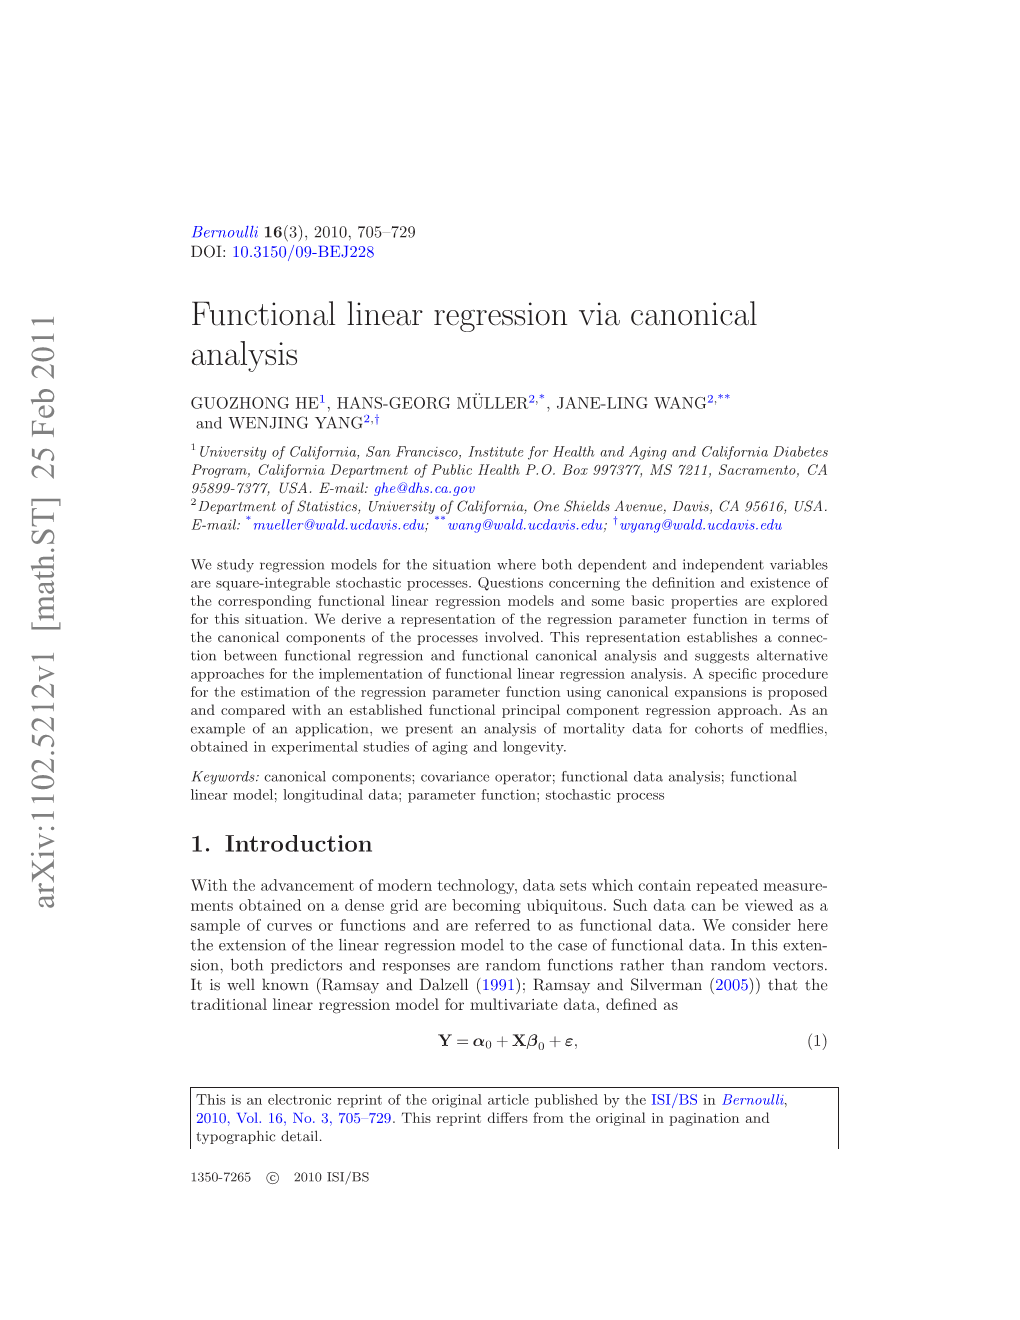 Functional Linear Regression Via Canonical Analysis